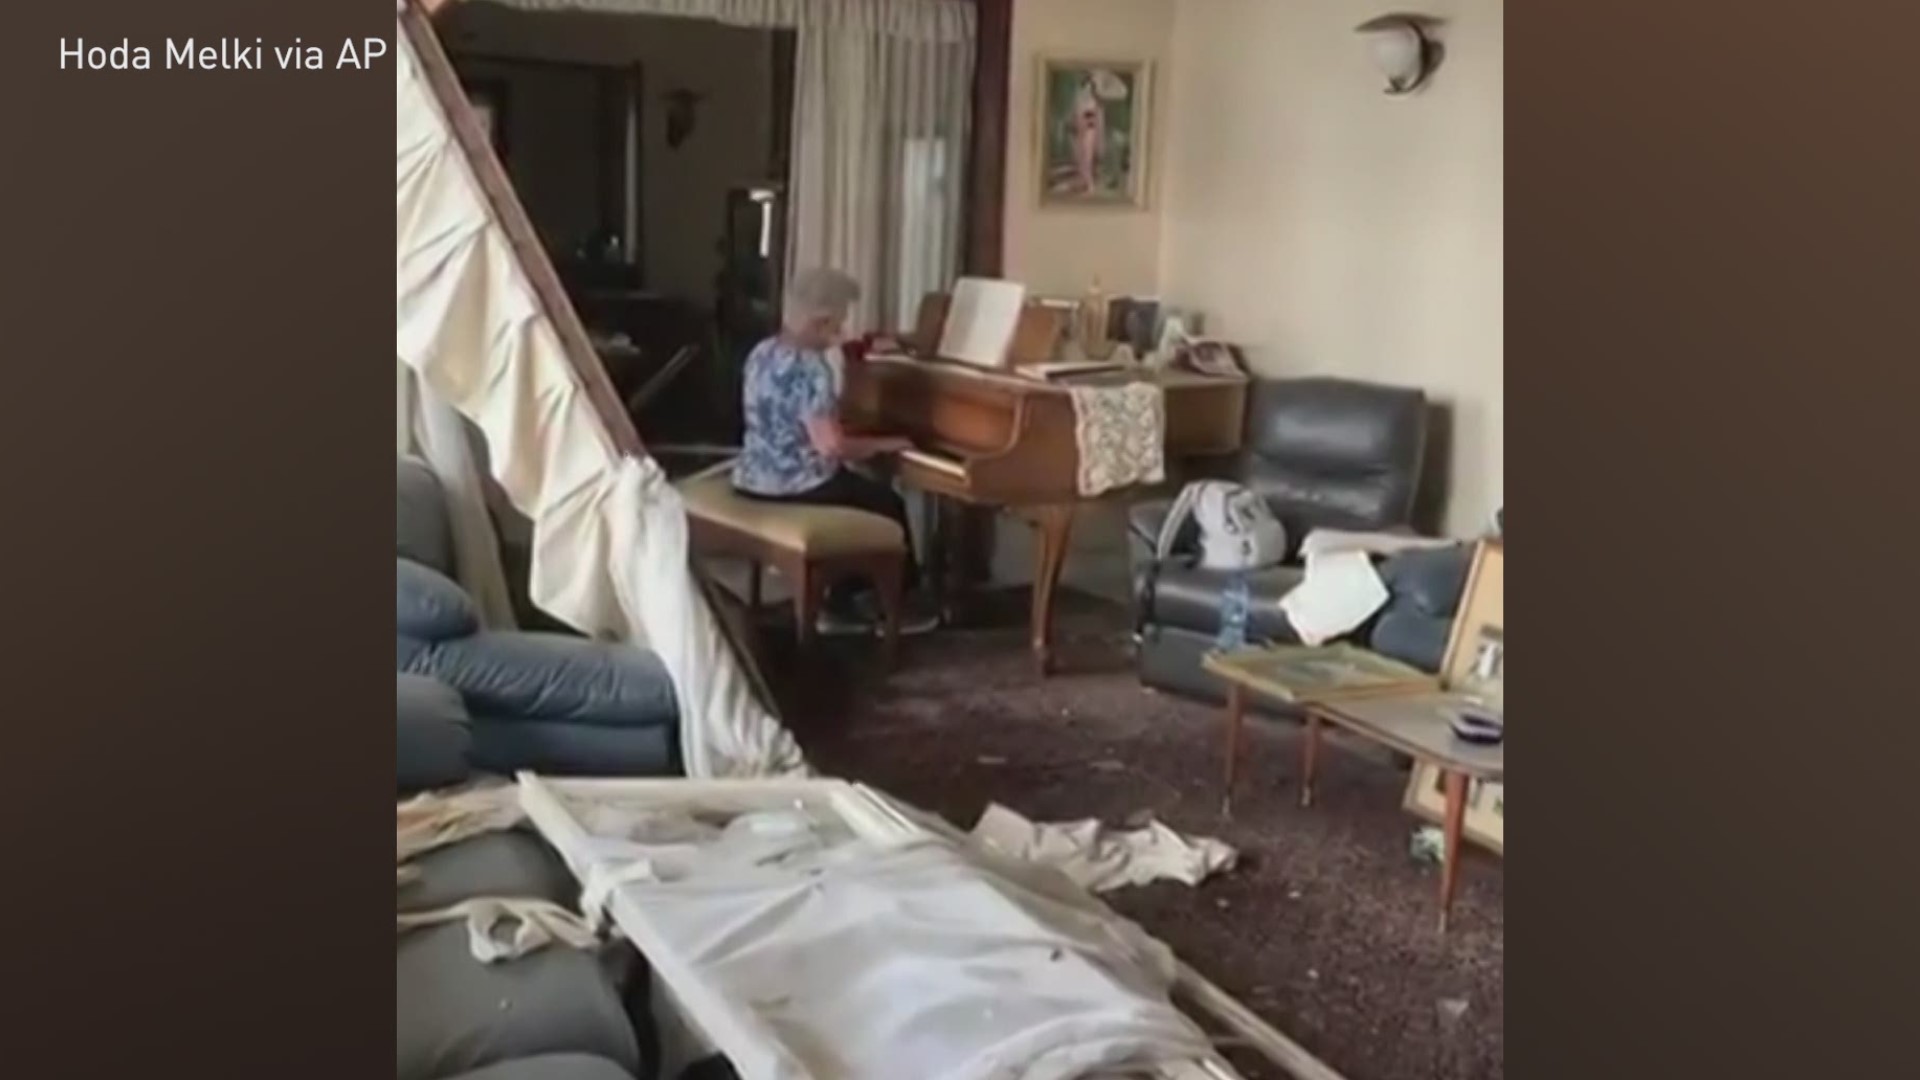 Beirut resident Hoda Melki recorded a video of her mother playing 'Auld Lang Syne' on a piano amid debris in her home the day after it was damaged by an explosion.